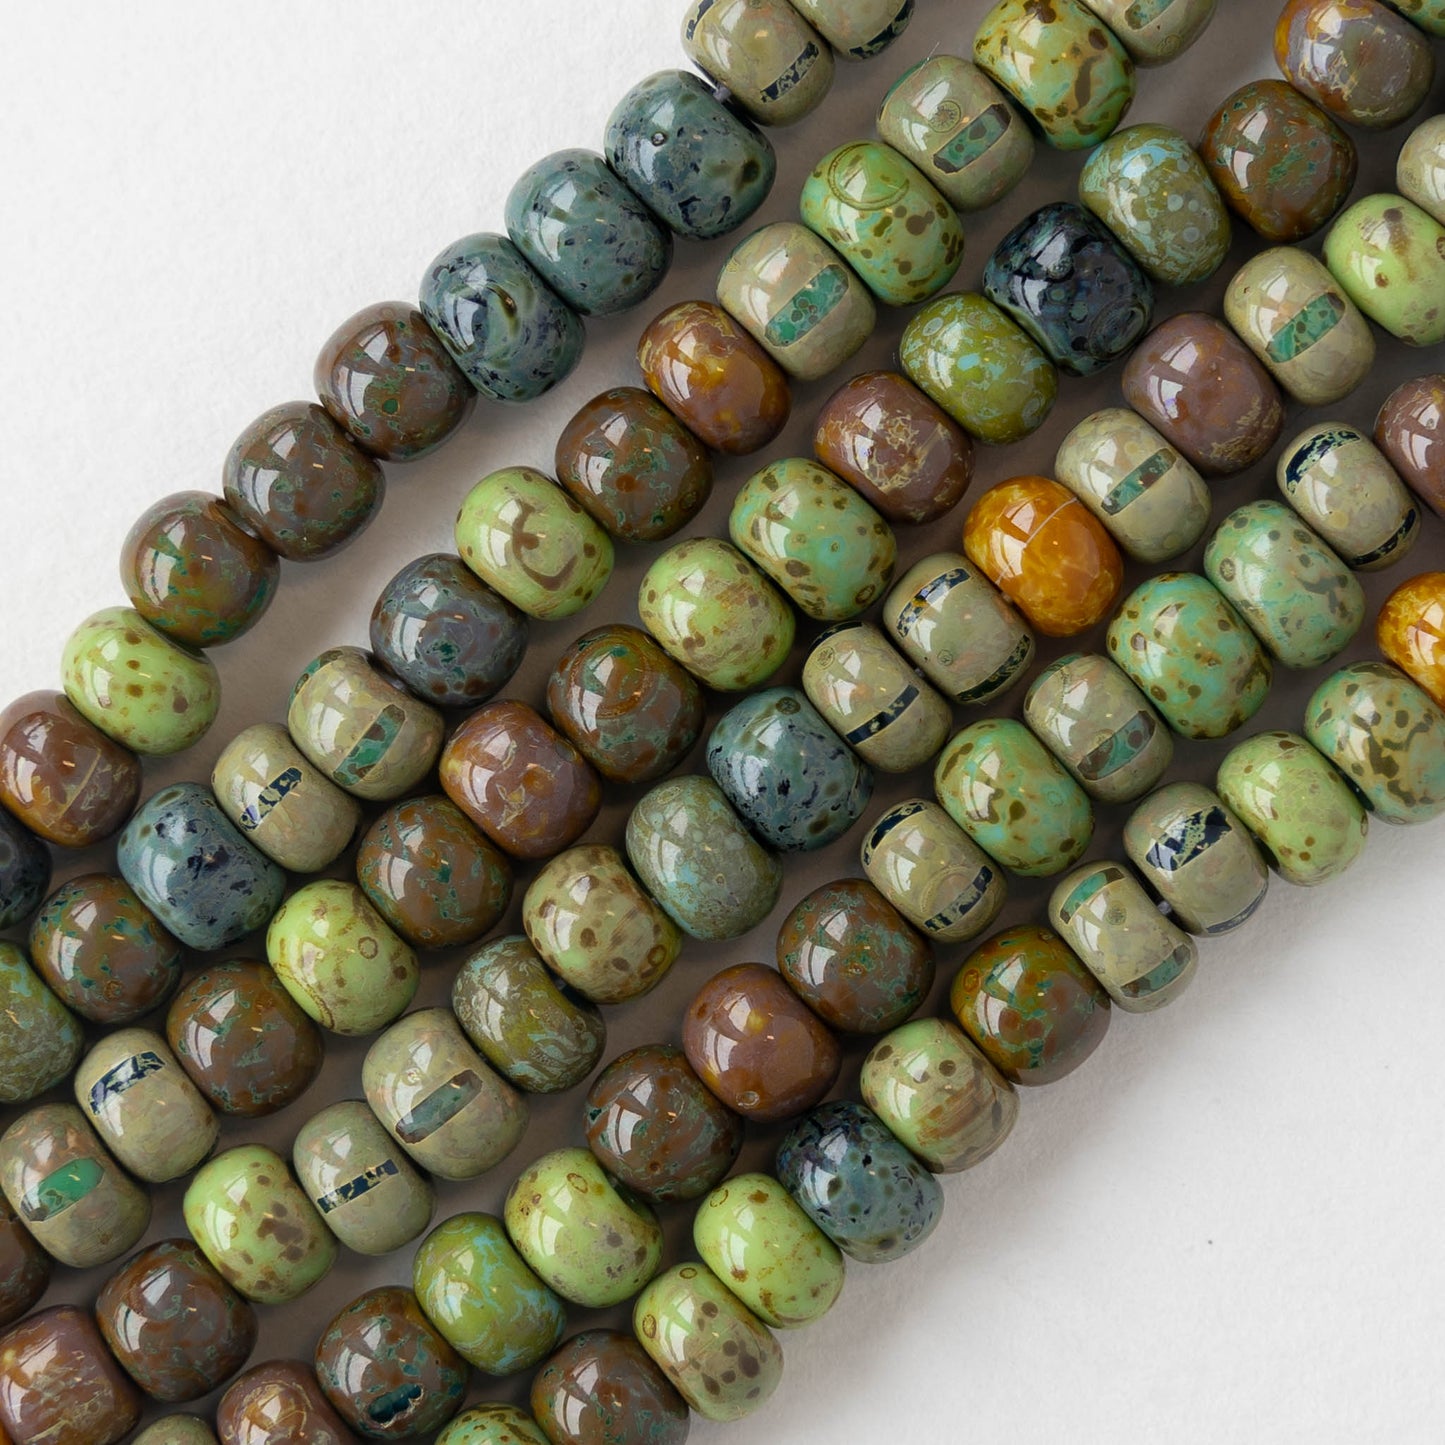 Size 2/0Seed Bead Mix - Aged Terra Cotta Picasso Mix - 10 inches